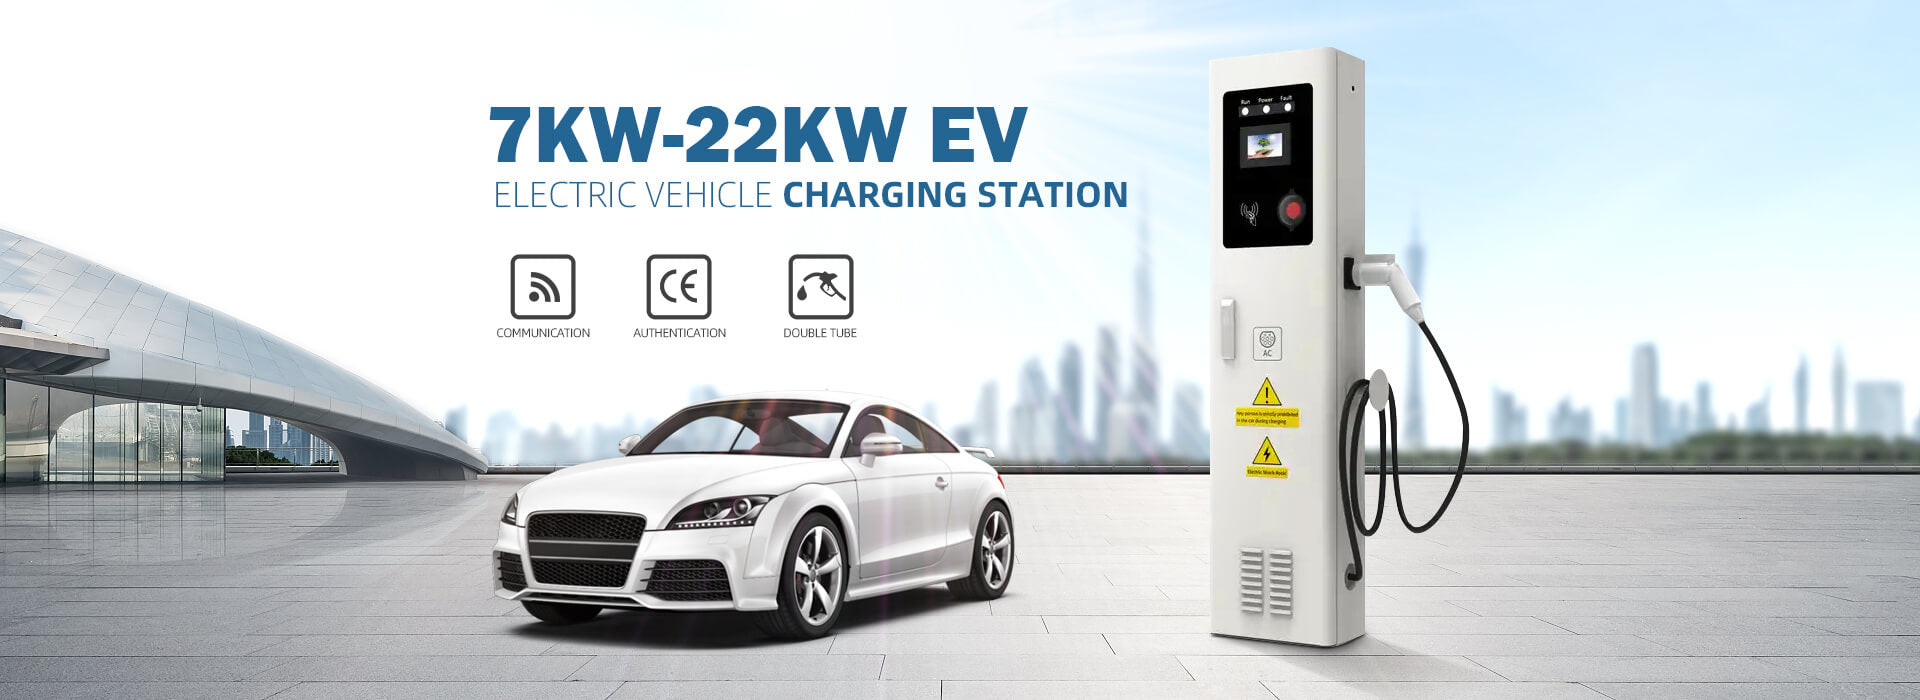 Electric Car Charging at Charging Station - Sustainable E-Mobility